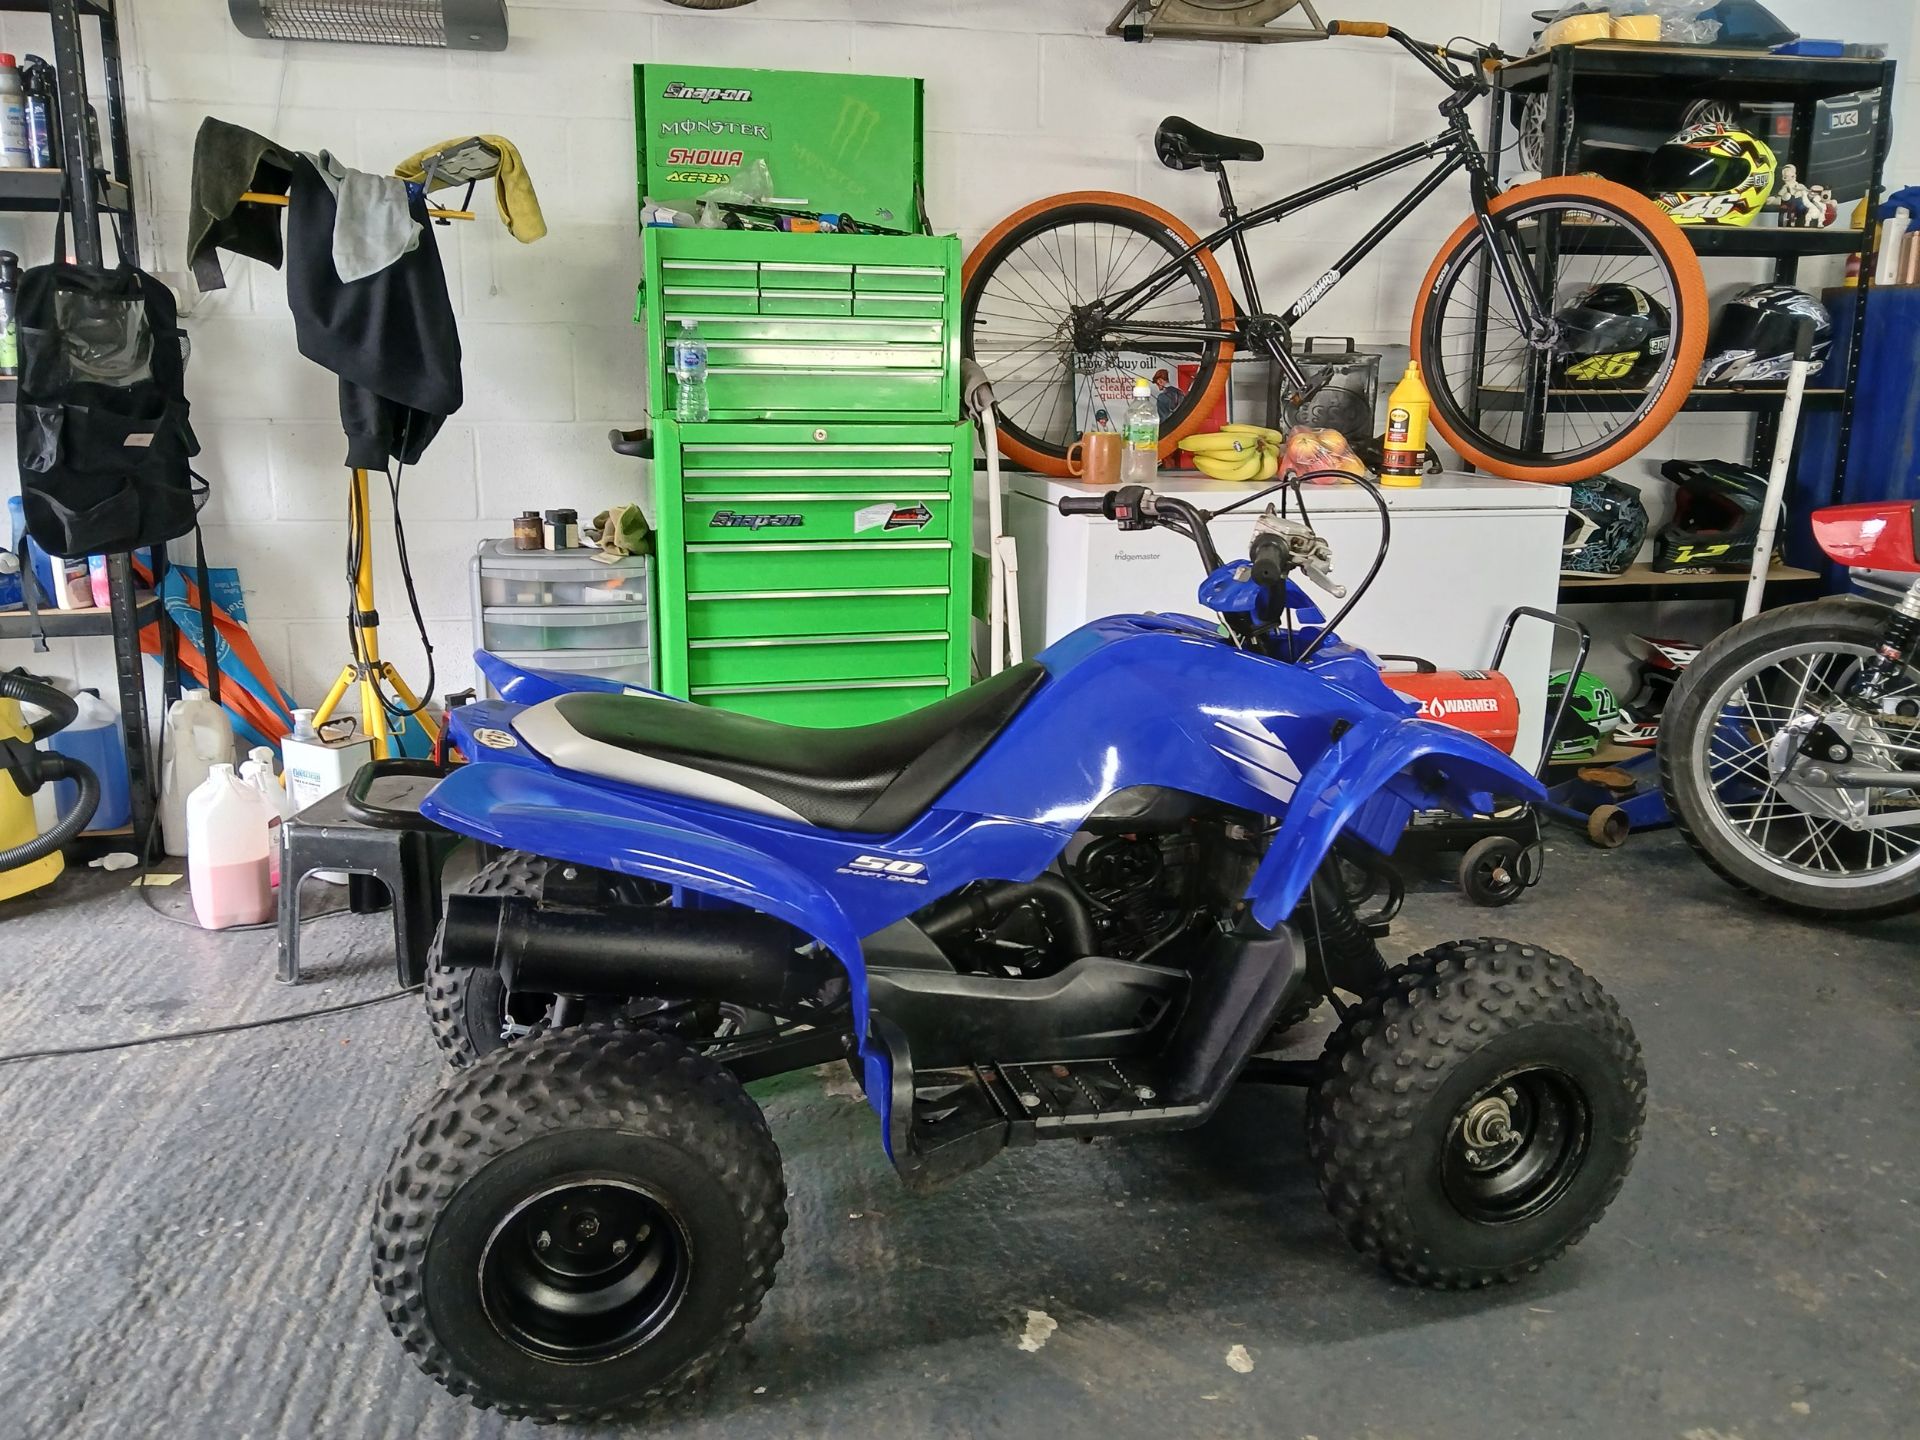 Yamaha YZM 50 quad bike. Good condition, recent service, vendor has owned since 2016. Runs and rides